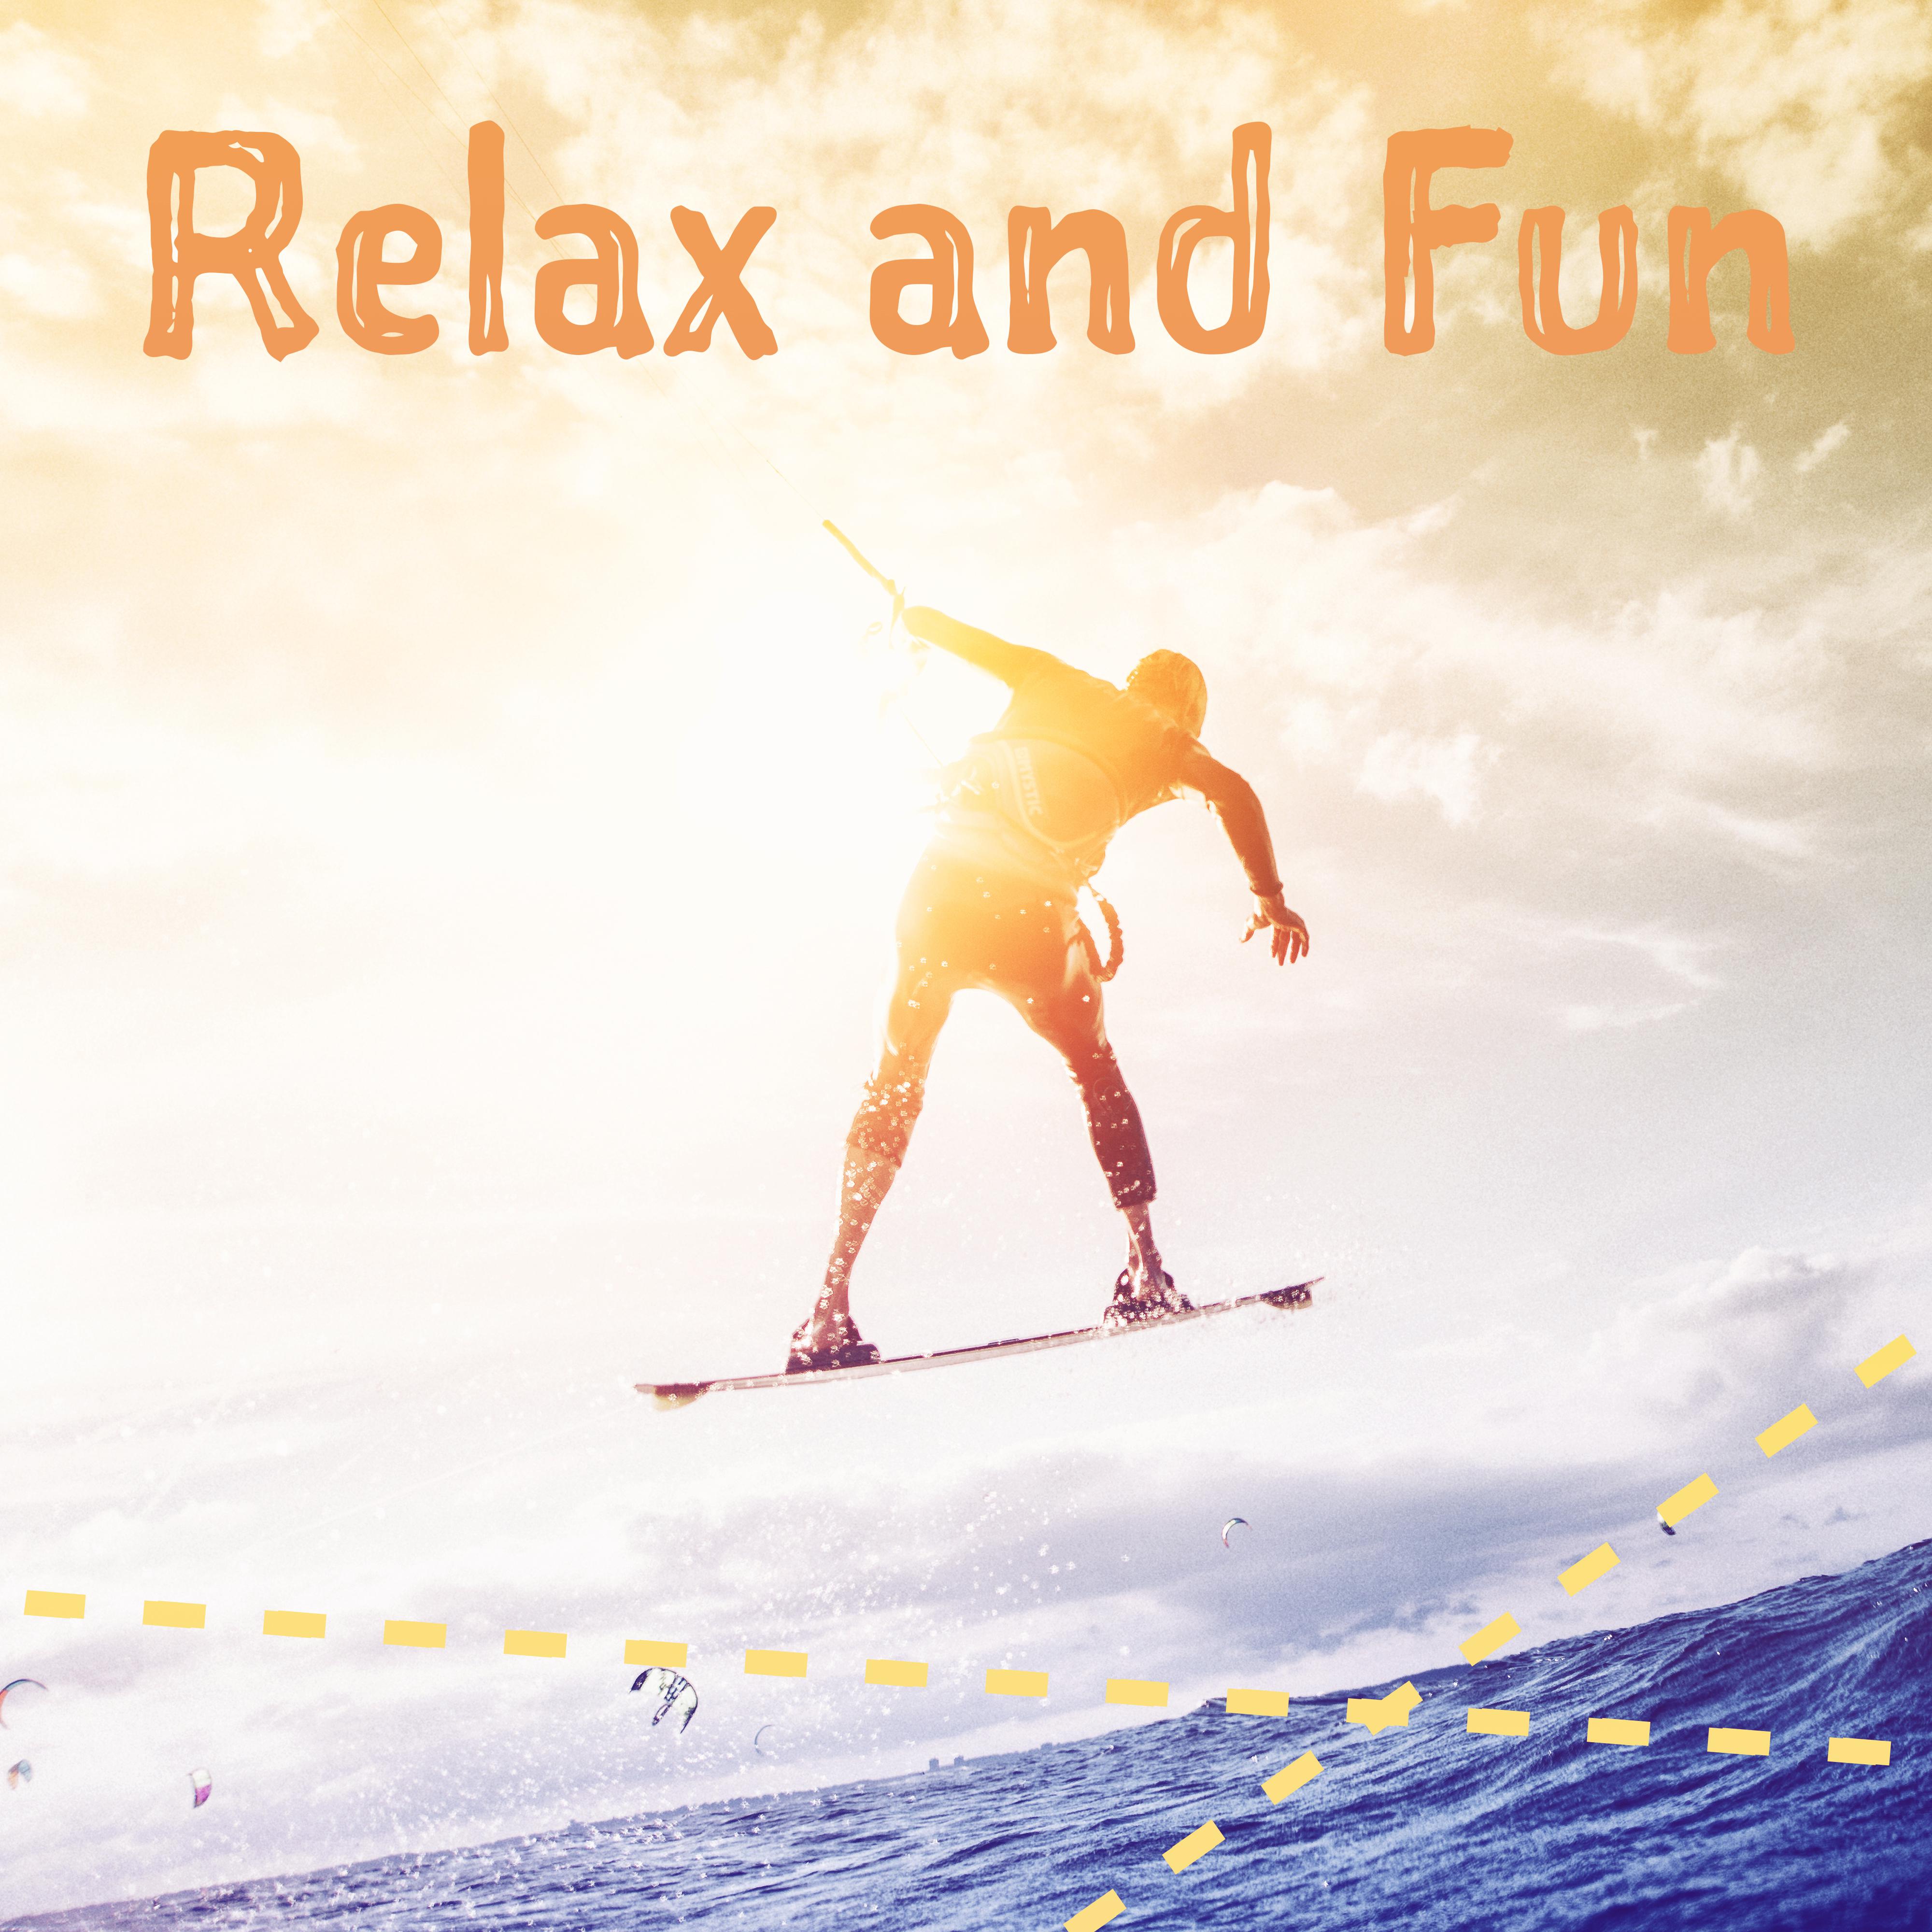 Relax and Fun – Best Calming Nature Sounds for Deep Relaxation, Music for Spa, Wellness, Massage, Birds & Ocean Waves